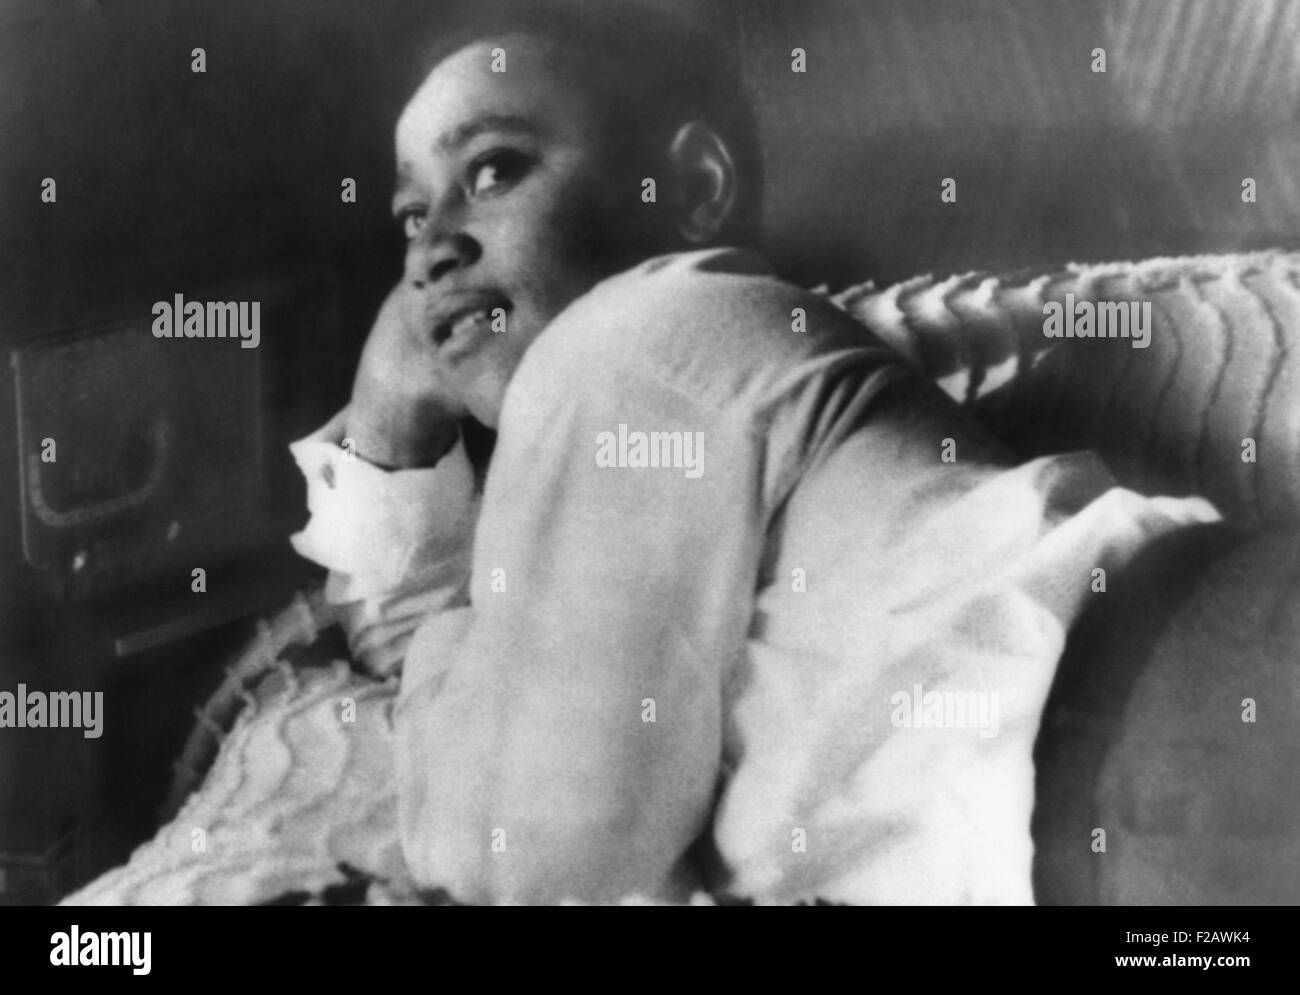 Emmett Till lying on his bed in his Chicago home in 1955. While visiting his relatives in Money, Mississippi, he spoke to 21-year-old white woman, Carolyn Bryant, the proprietor of a grocery store. Bryant's husband Roy and his half-brother J. W. Milam tortured and killed Emmett Till on Aug. 28, 1955. (CSU_2015_11_1334) Stock Photo